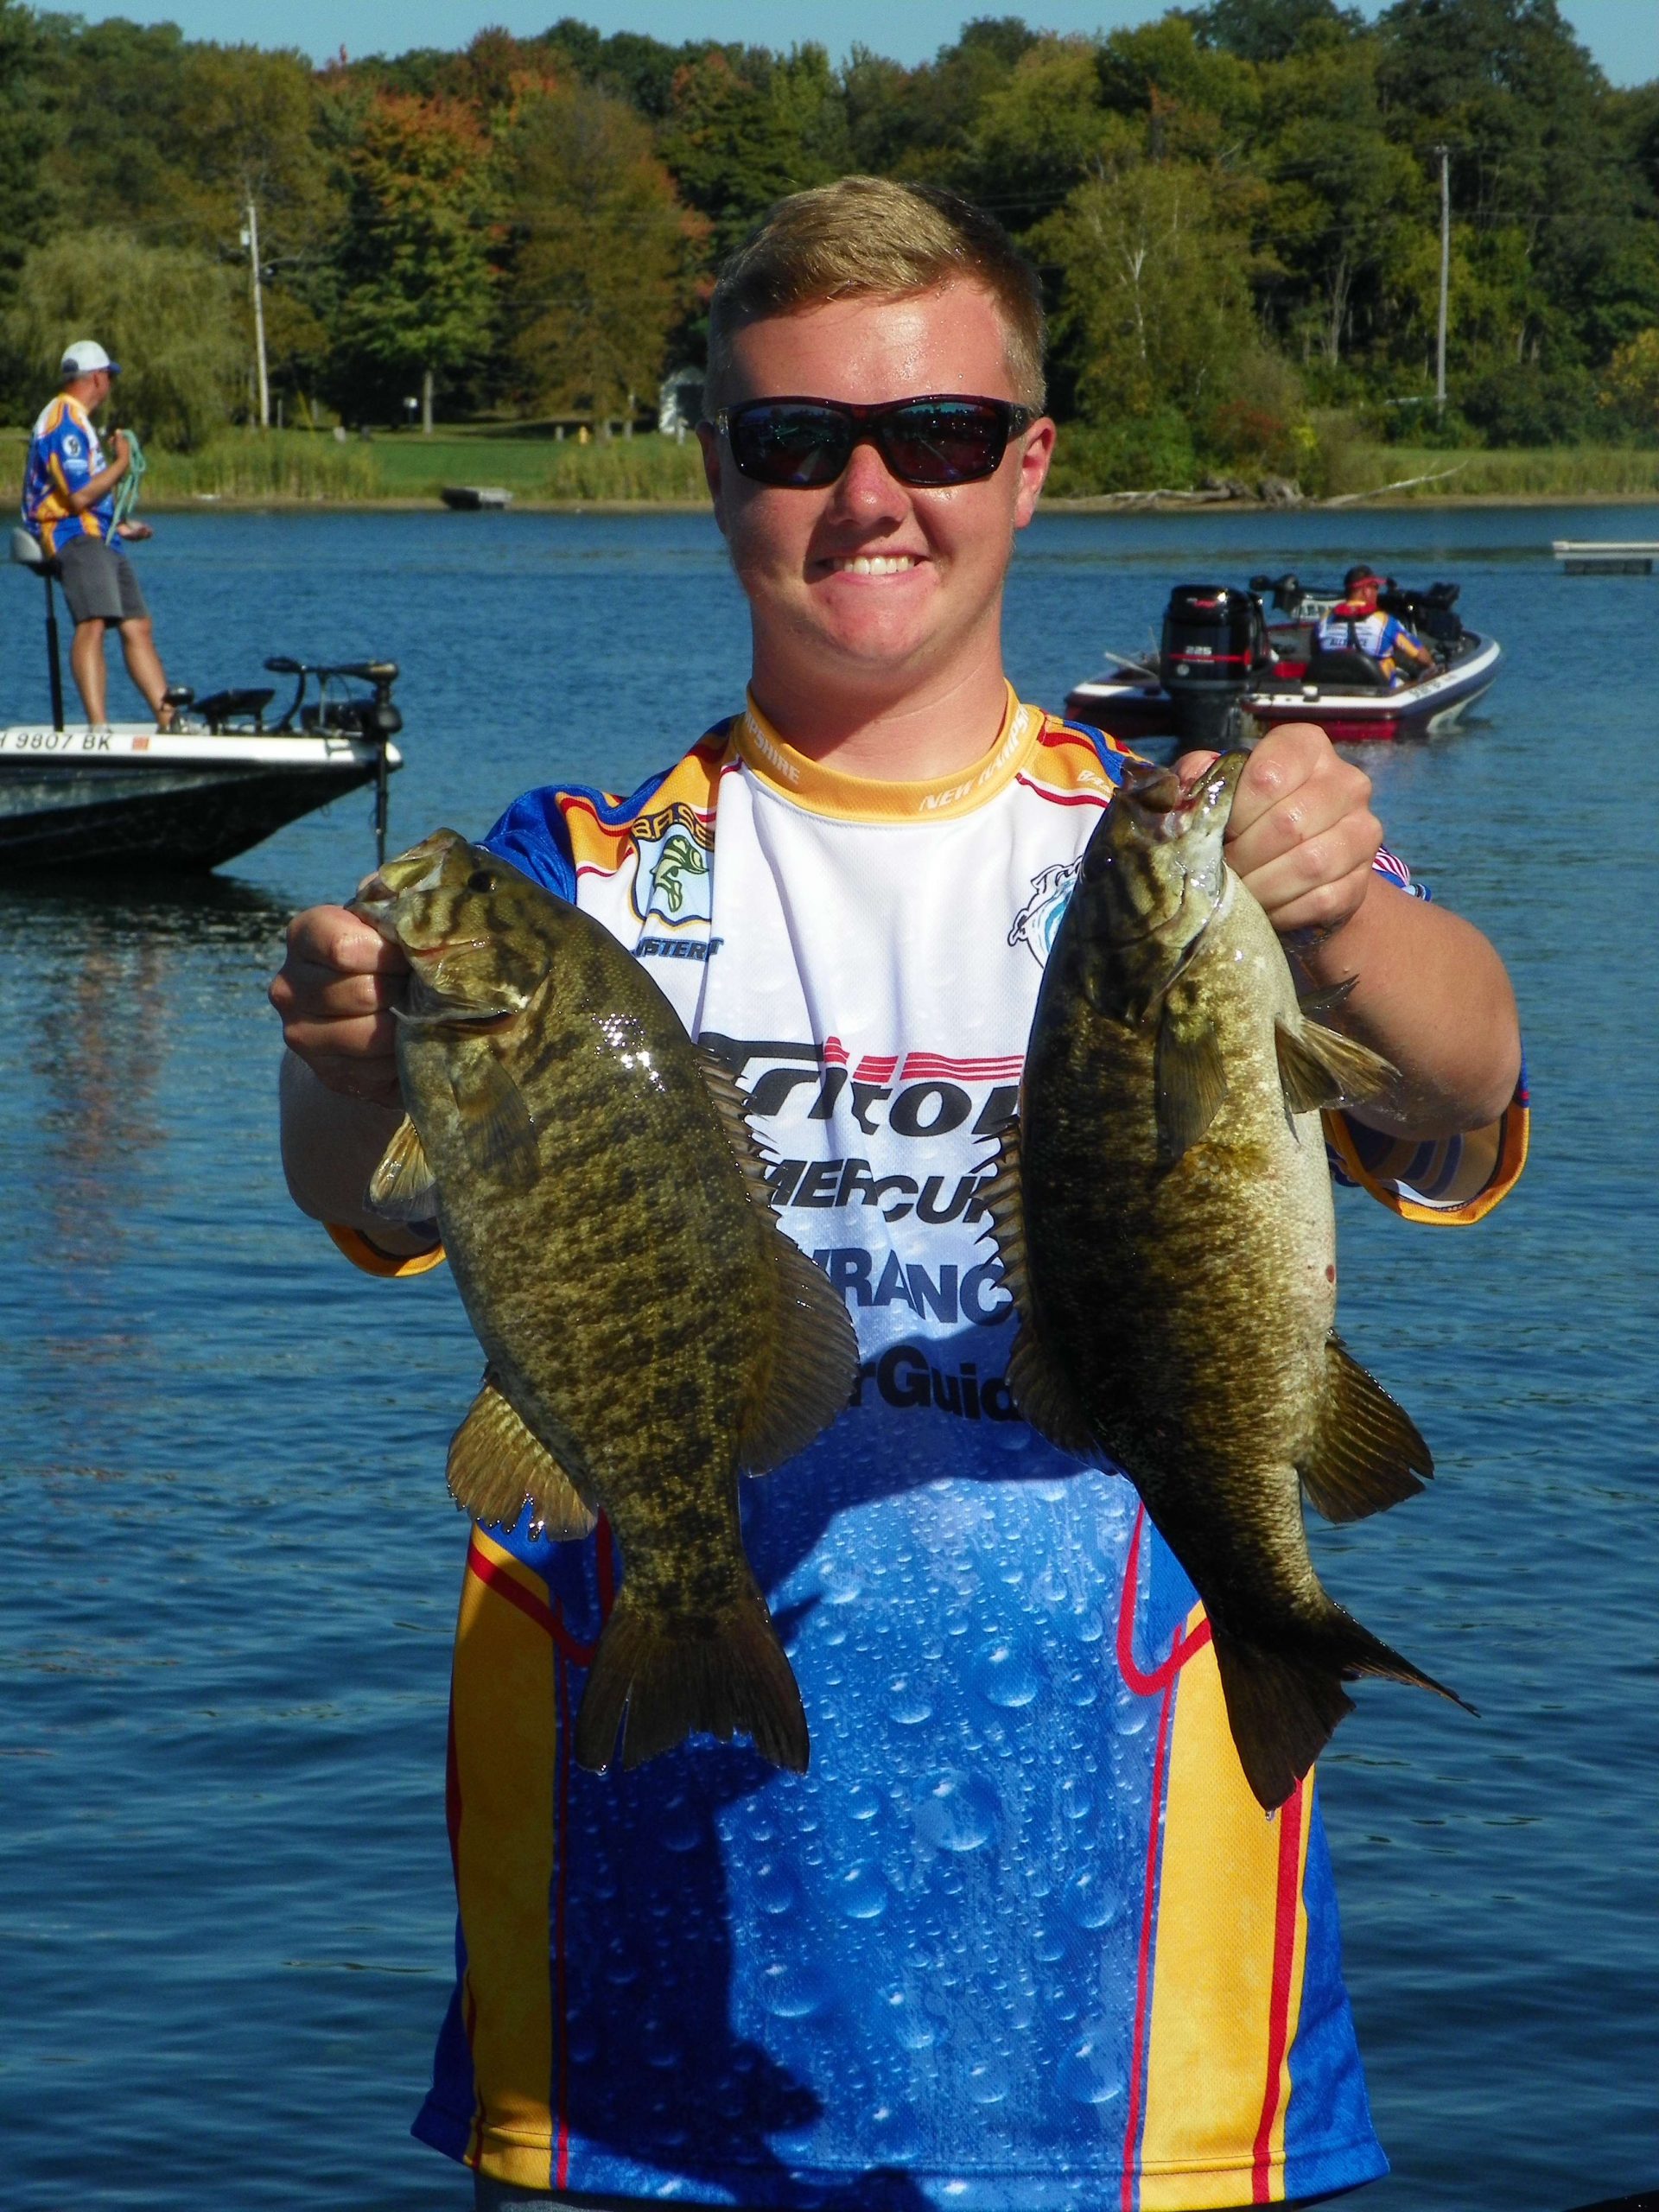 <p>New Hampshire: Cameron Sterritt</p>
<p>
Sterritt is a senior at Exeter High School. He has been the New Hampshire Junior Bassmasters Angler of the Year for the past three years. He created, organized and helped run the first bass fishing team at his high school.